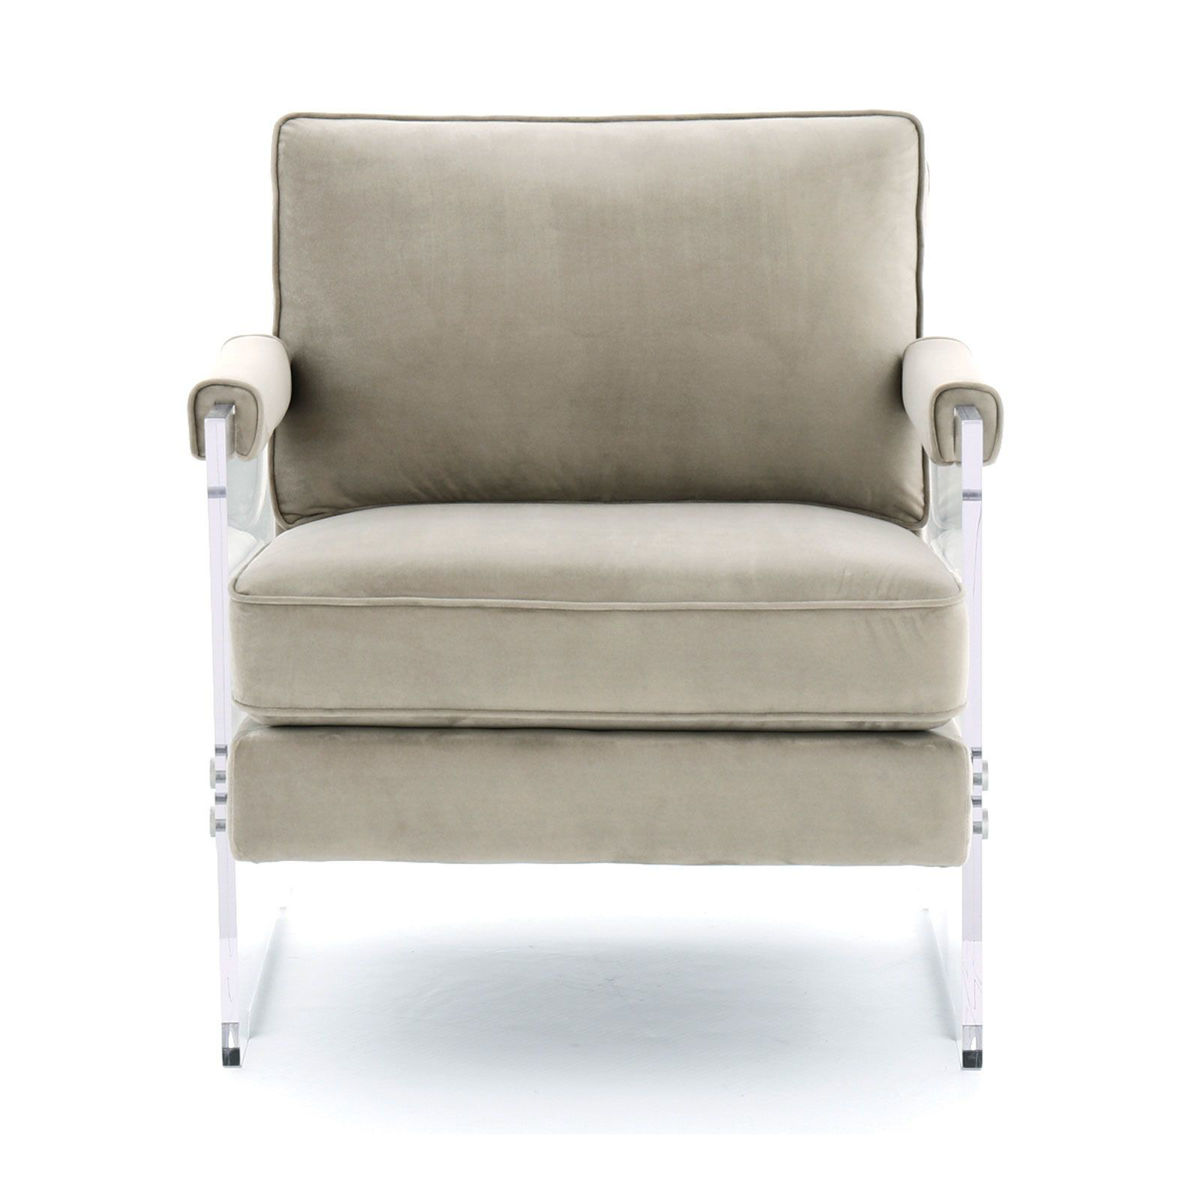 Picture of Avonley Accent Chair